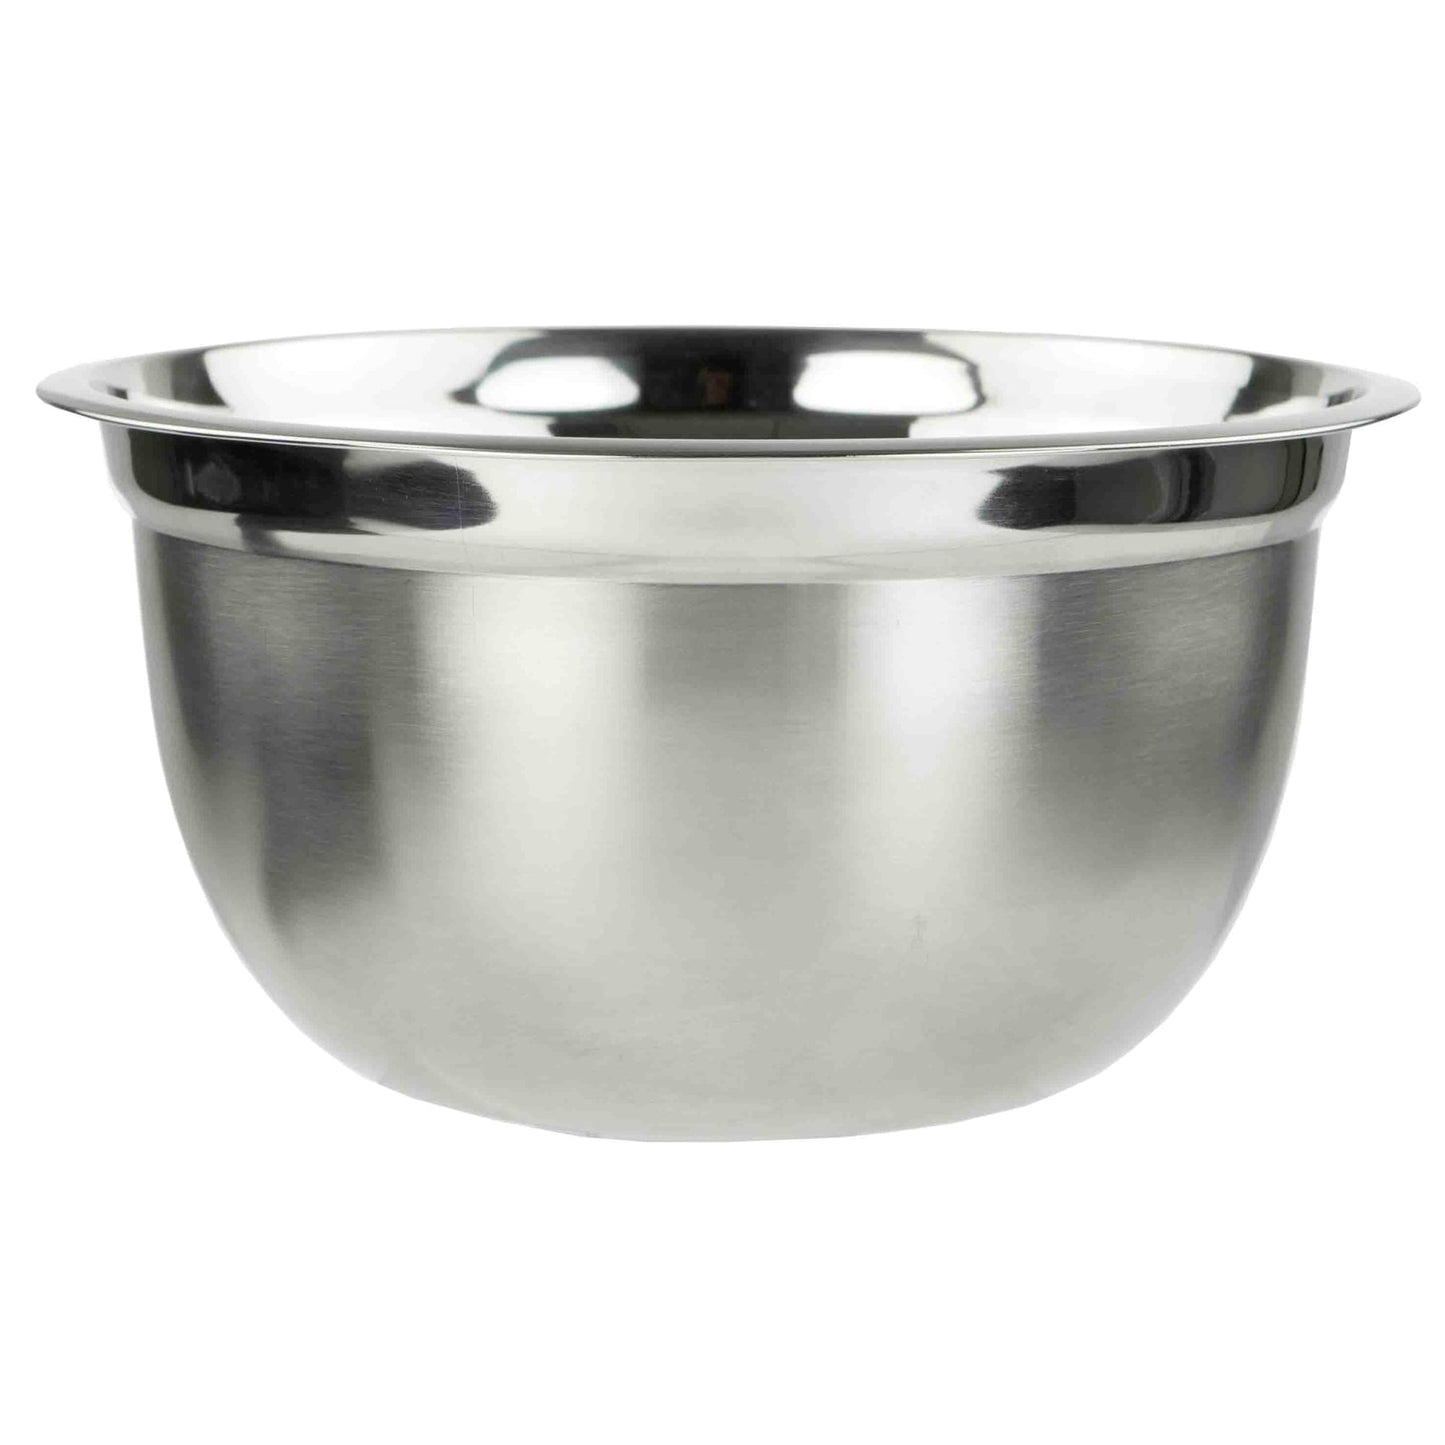 5 QT. Stainless Steel Beveled Anti-Skid Mixing Bowl, Silver